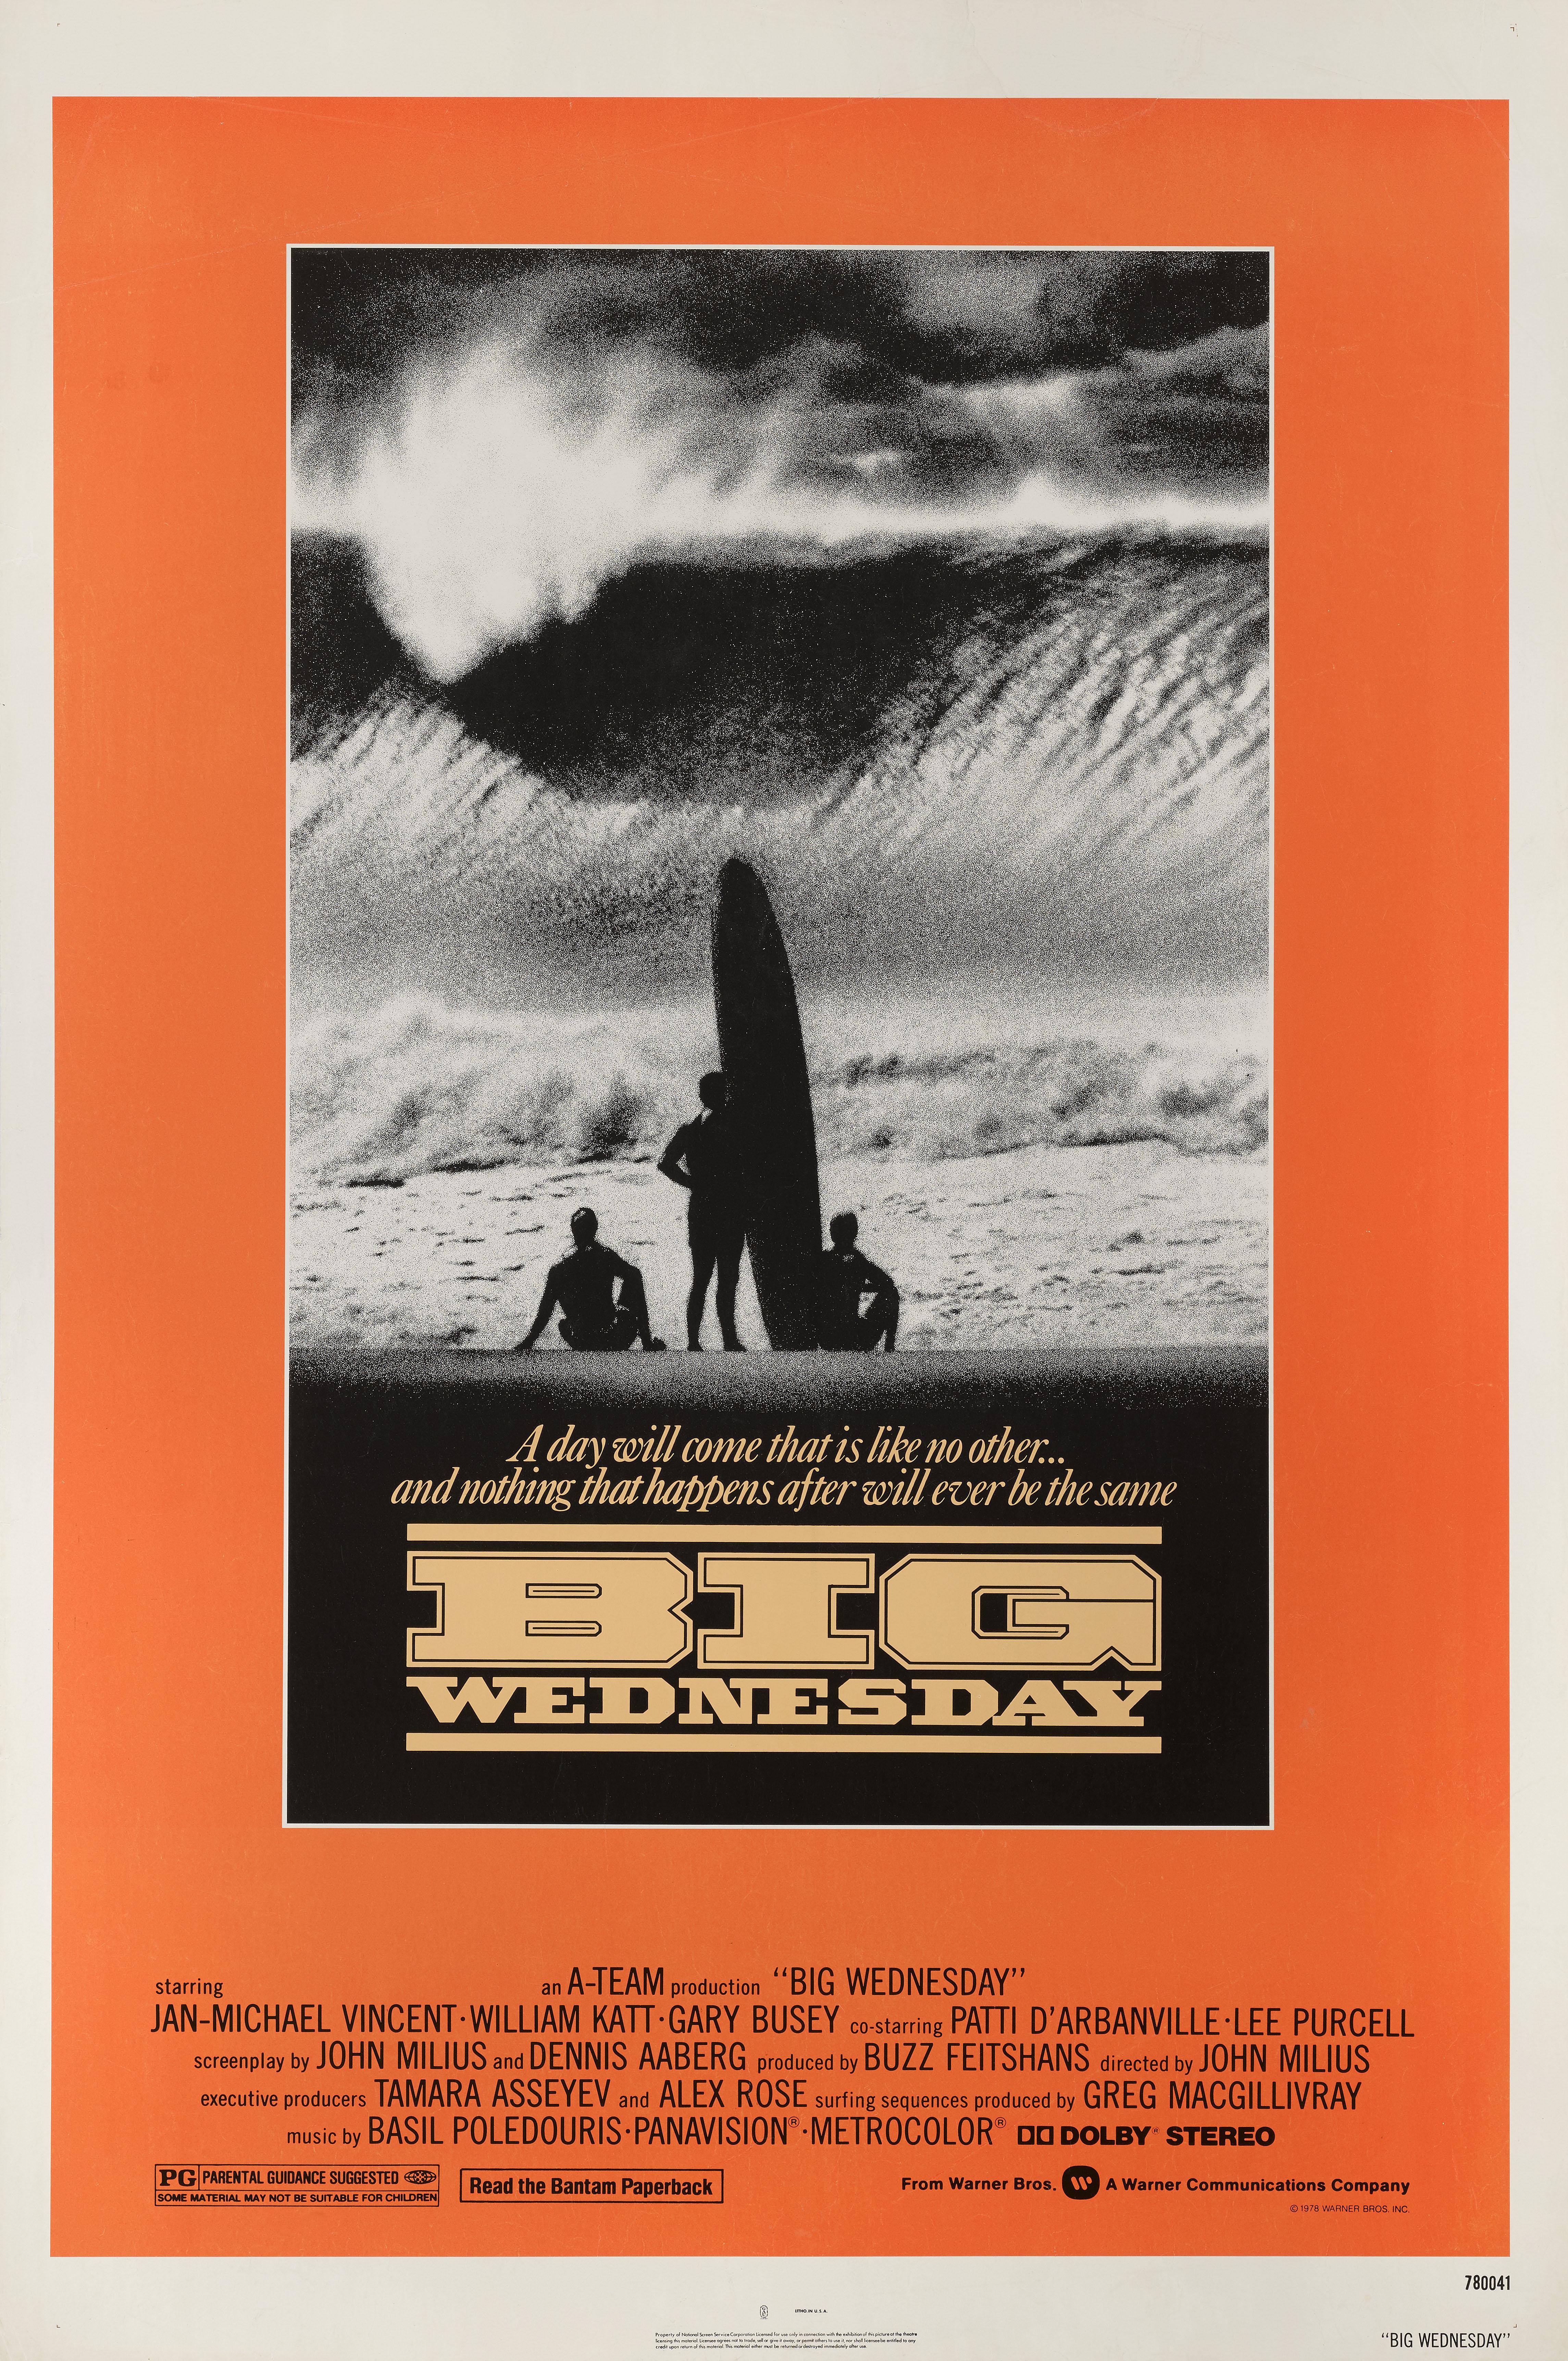 Original US film poster for the cult 1978 surfing movie staring Jan-Michael Vincent, William Katt and directed by John Milius.
This poster is conservation linen backed and it would be shipped rolled in a strong tube.